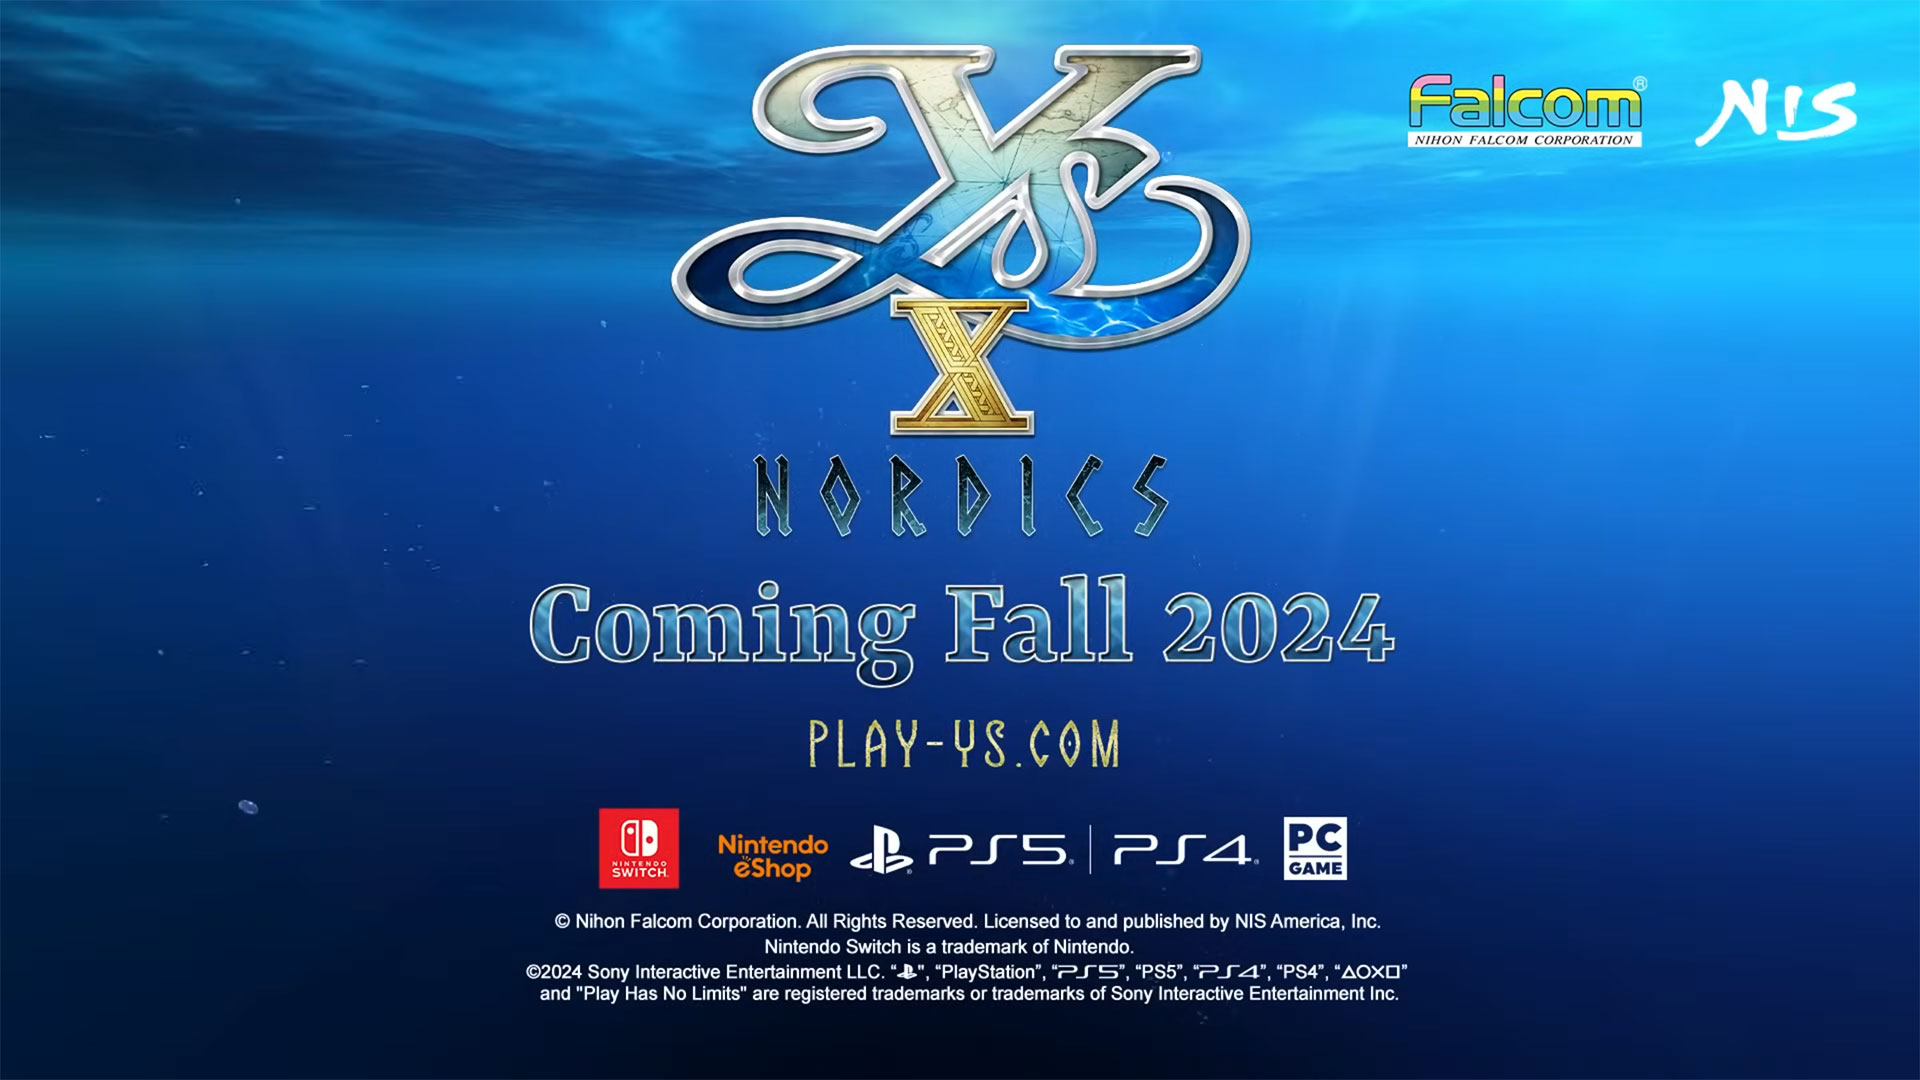 Ys X: Nordics is heading to the West sometime this fall